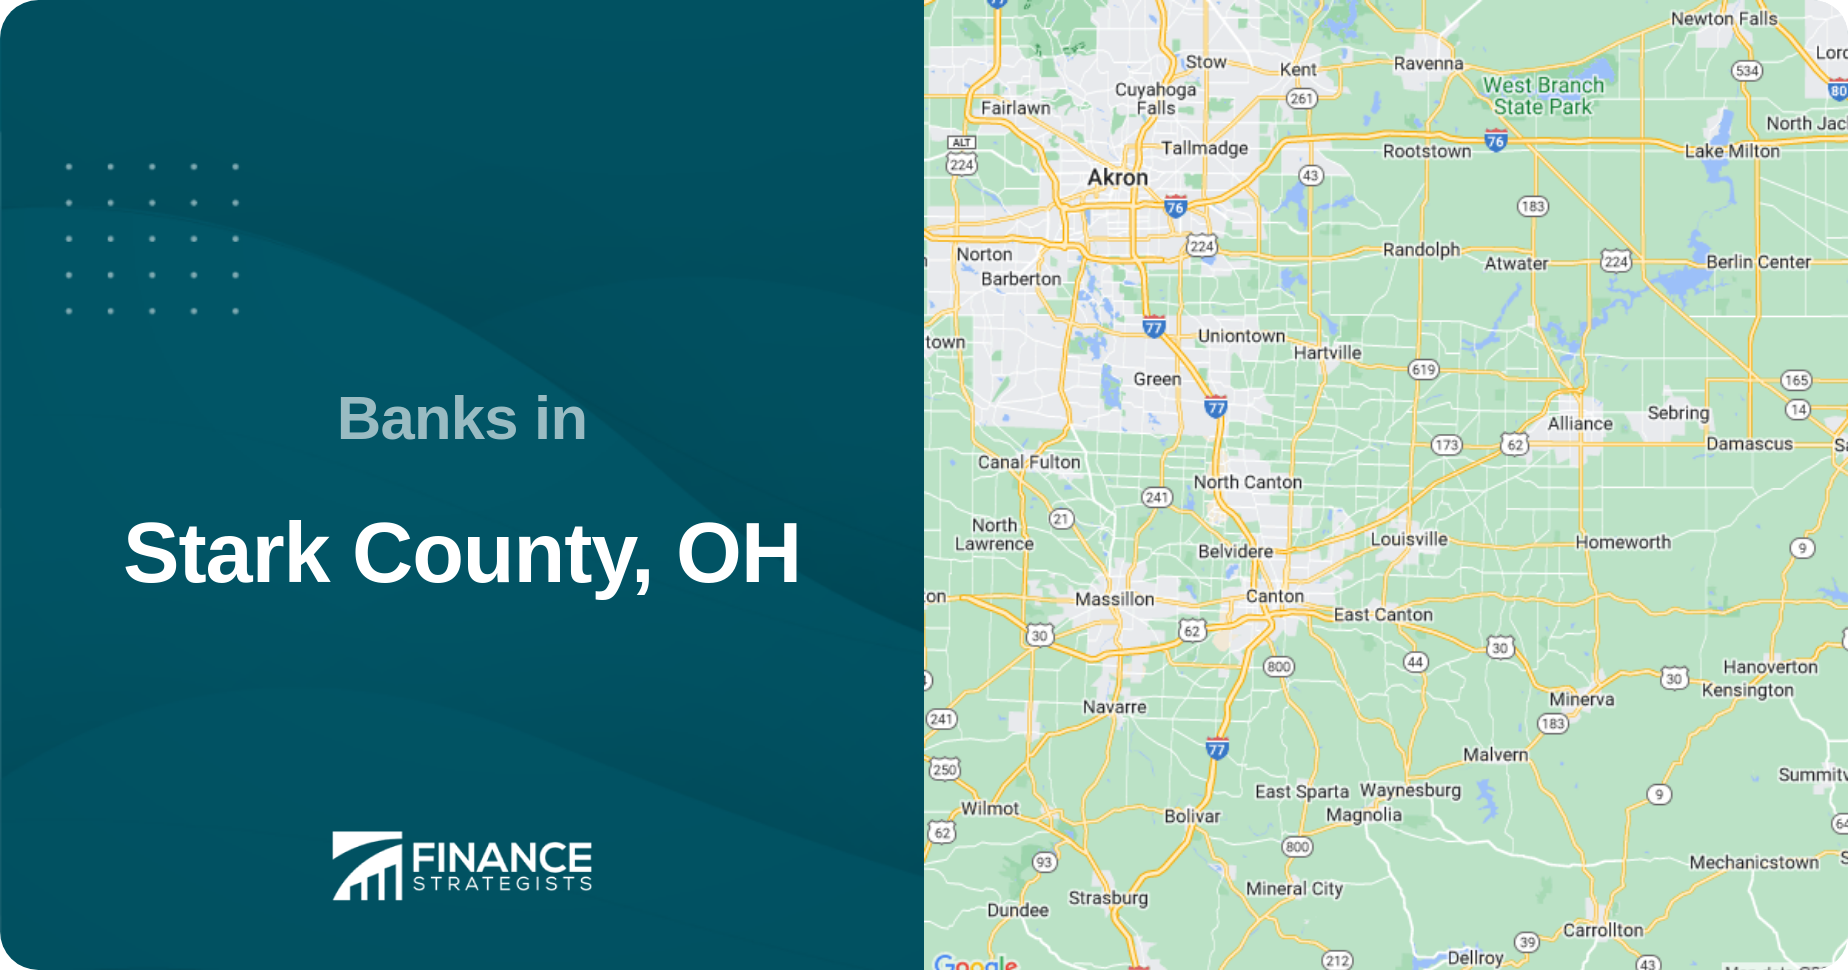 Banks in Stark County, OH